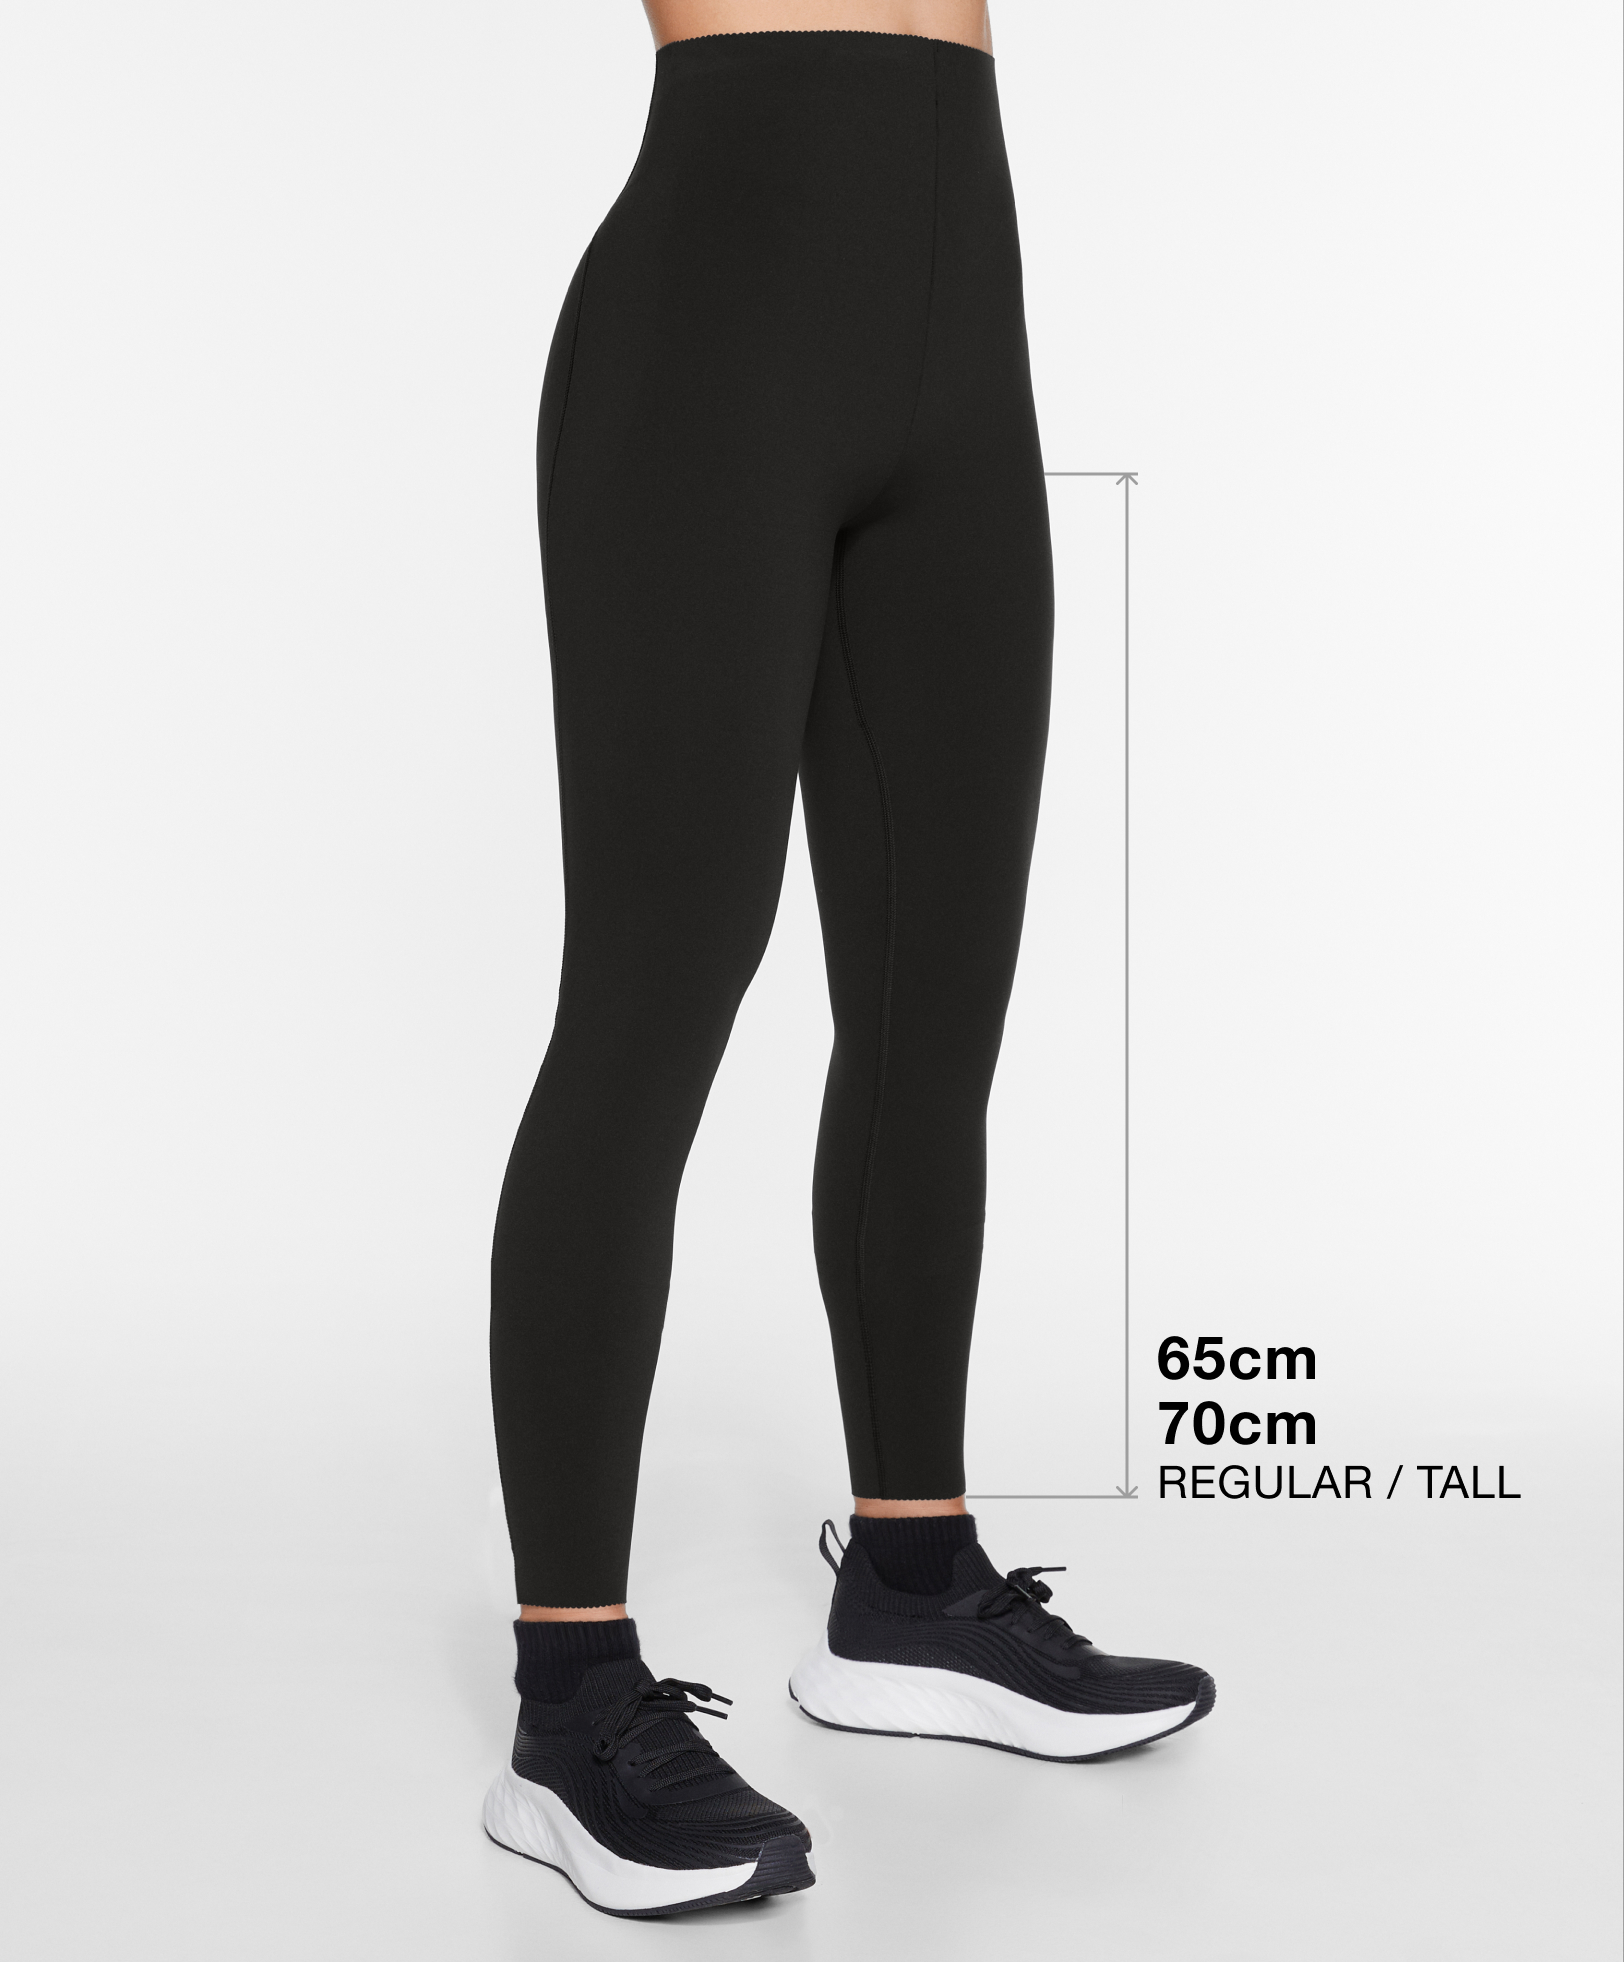 Kyoto High-Rise Ankle Length Legging  Ankle leggings, Ankle length leggings,  Activewear trends